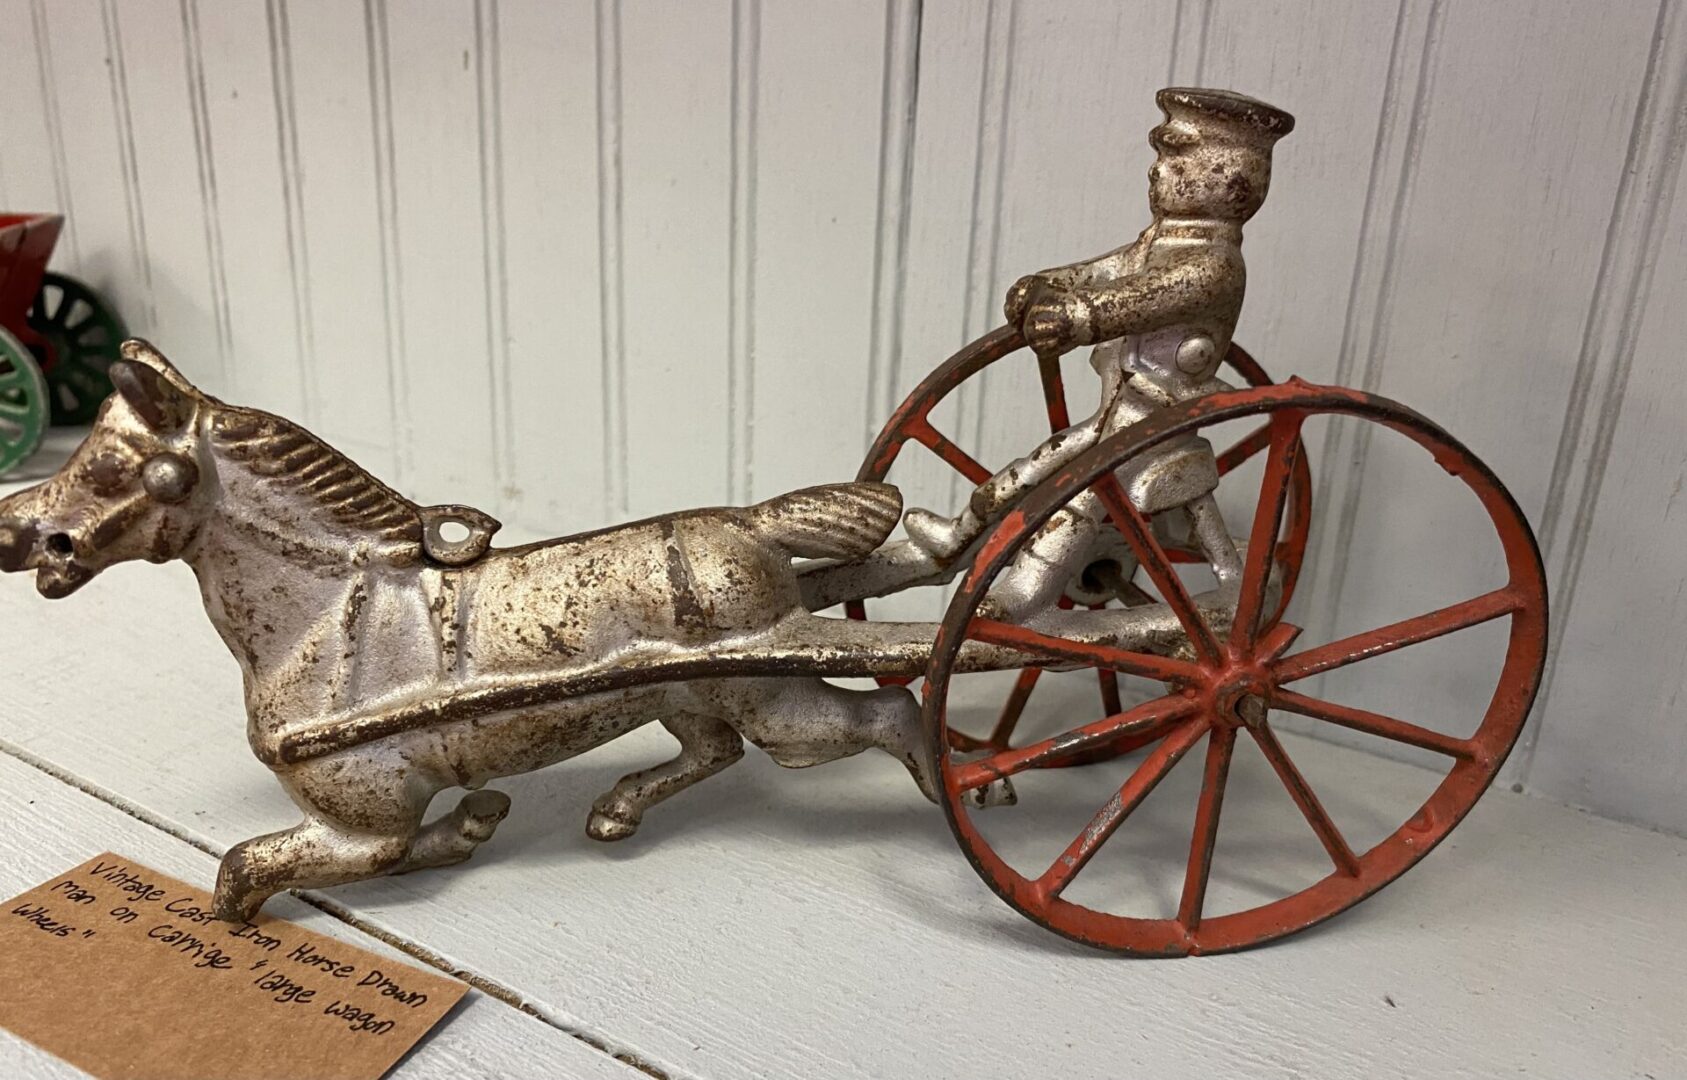 A metal horse and carriage with a man riding it.